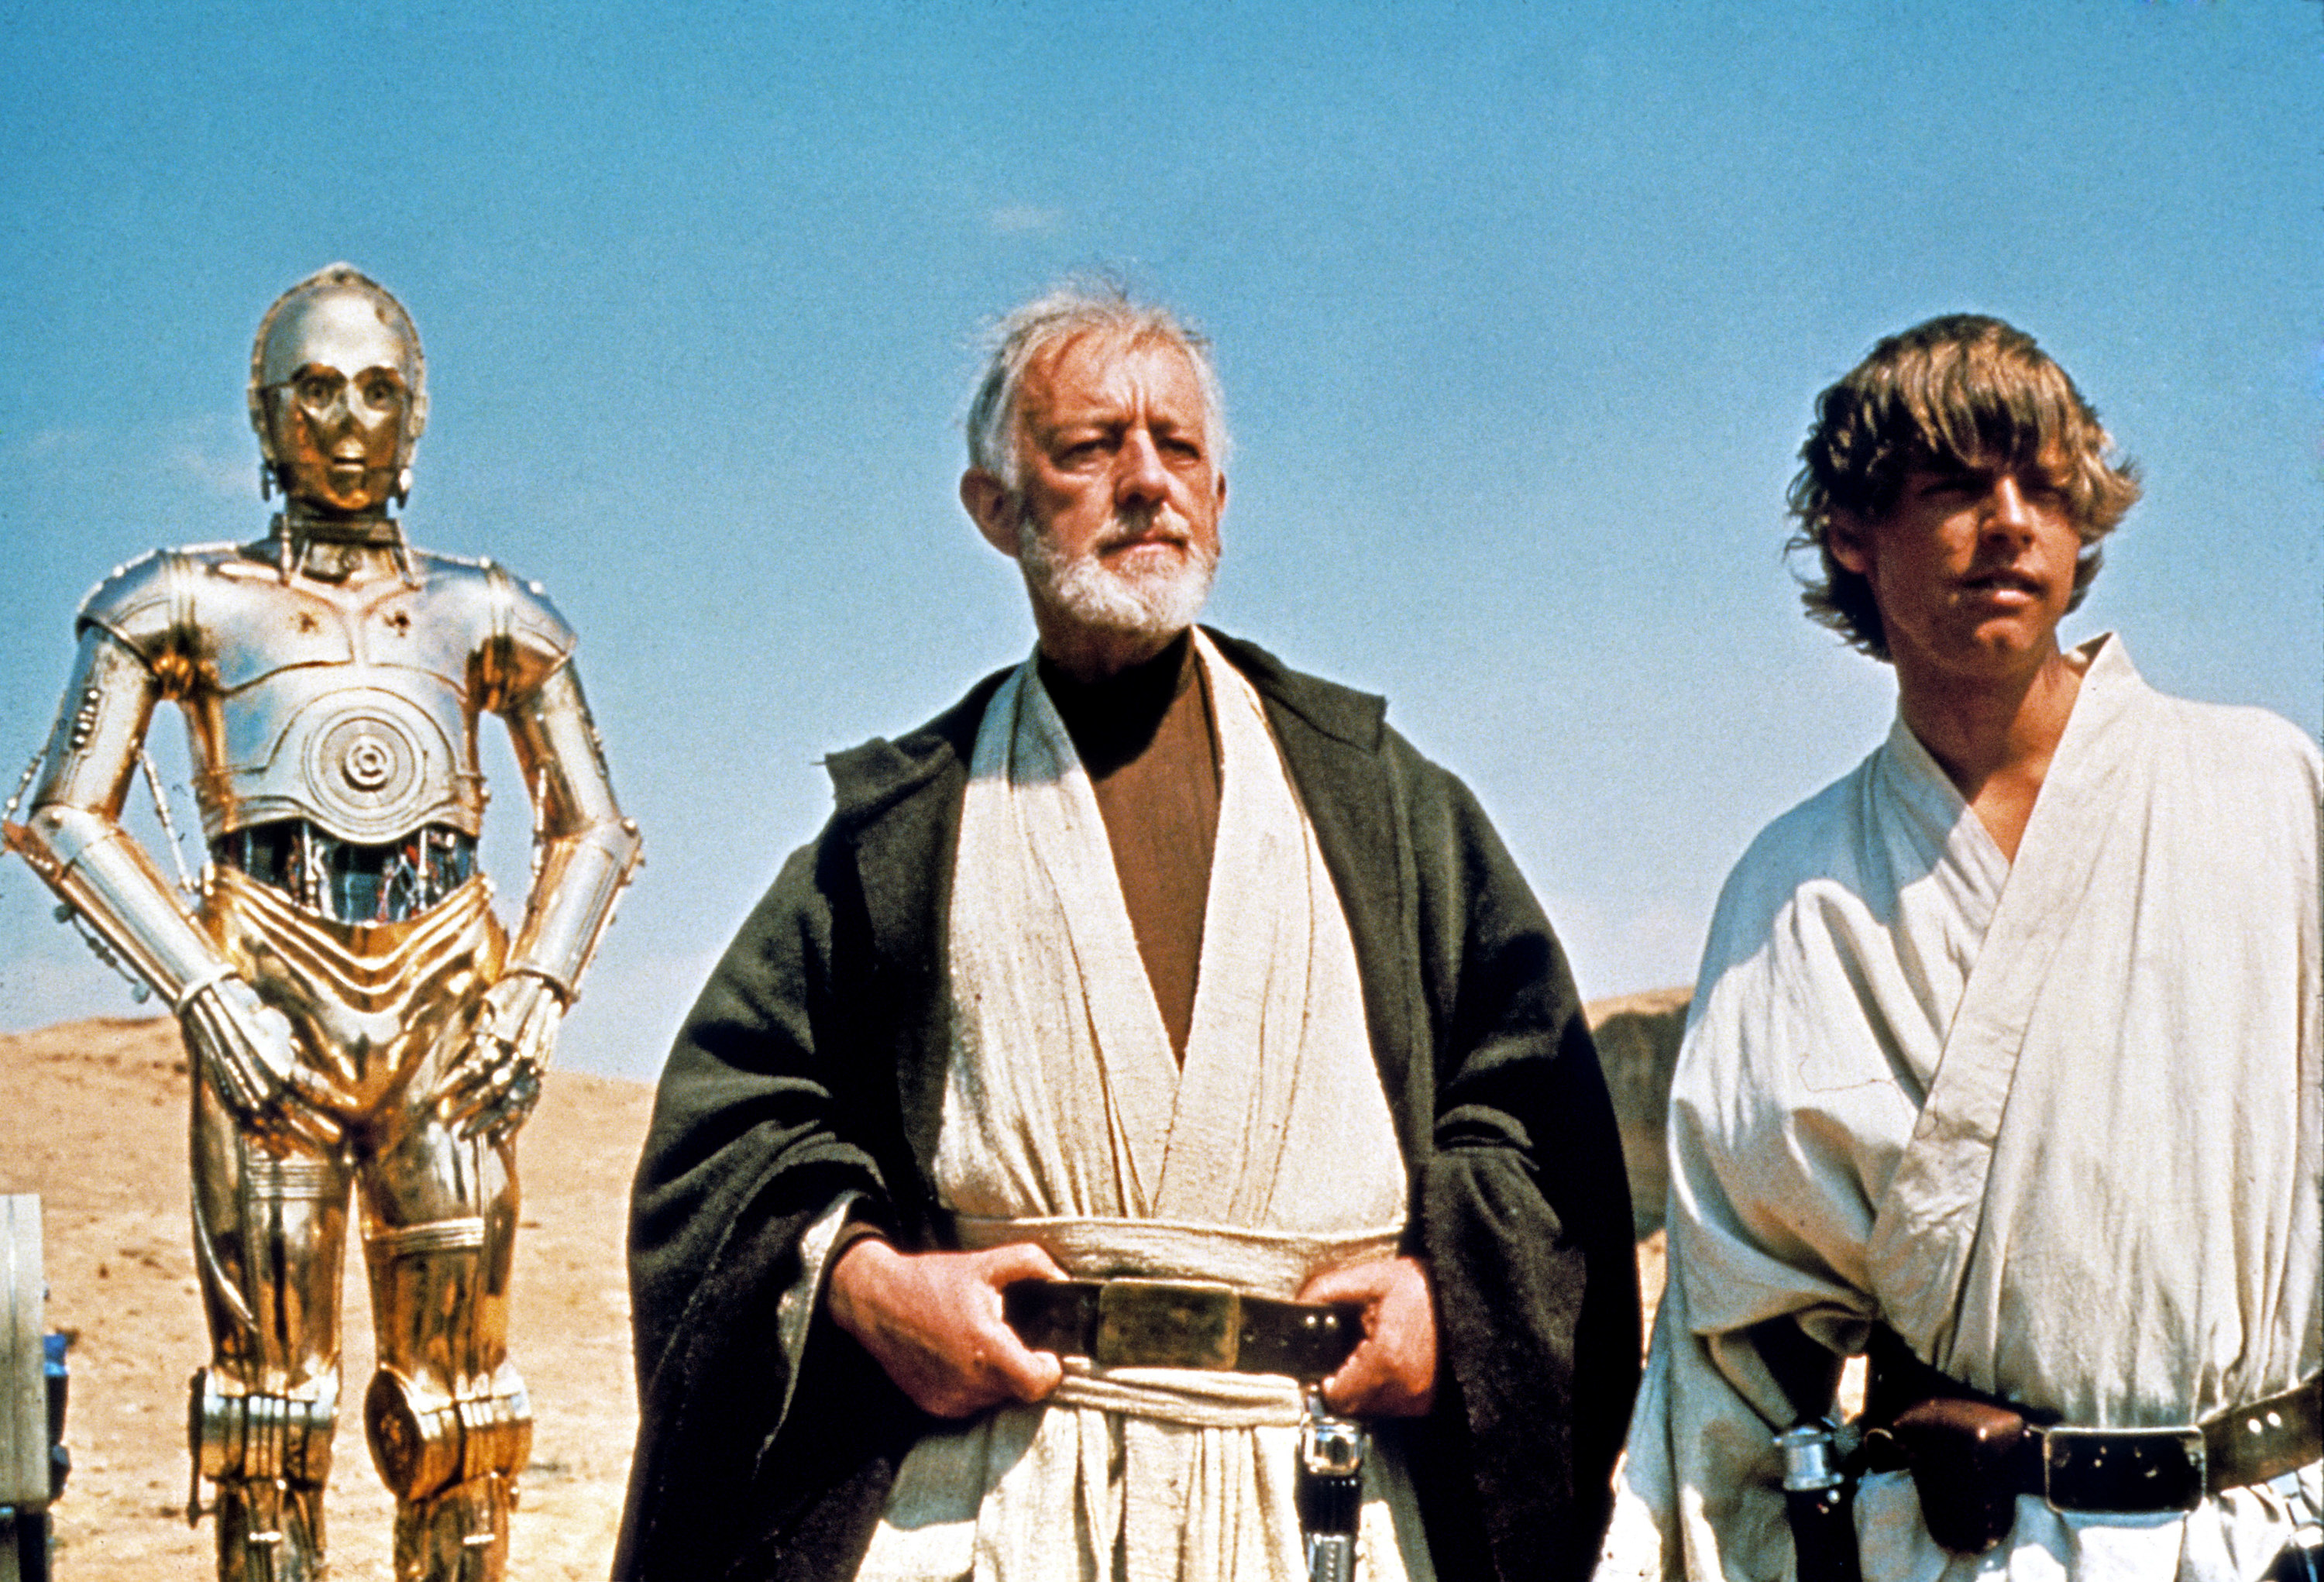 three of the characters from the older Star Wars movie